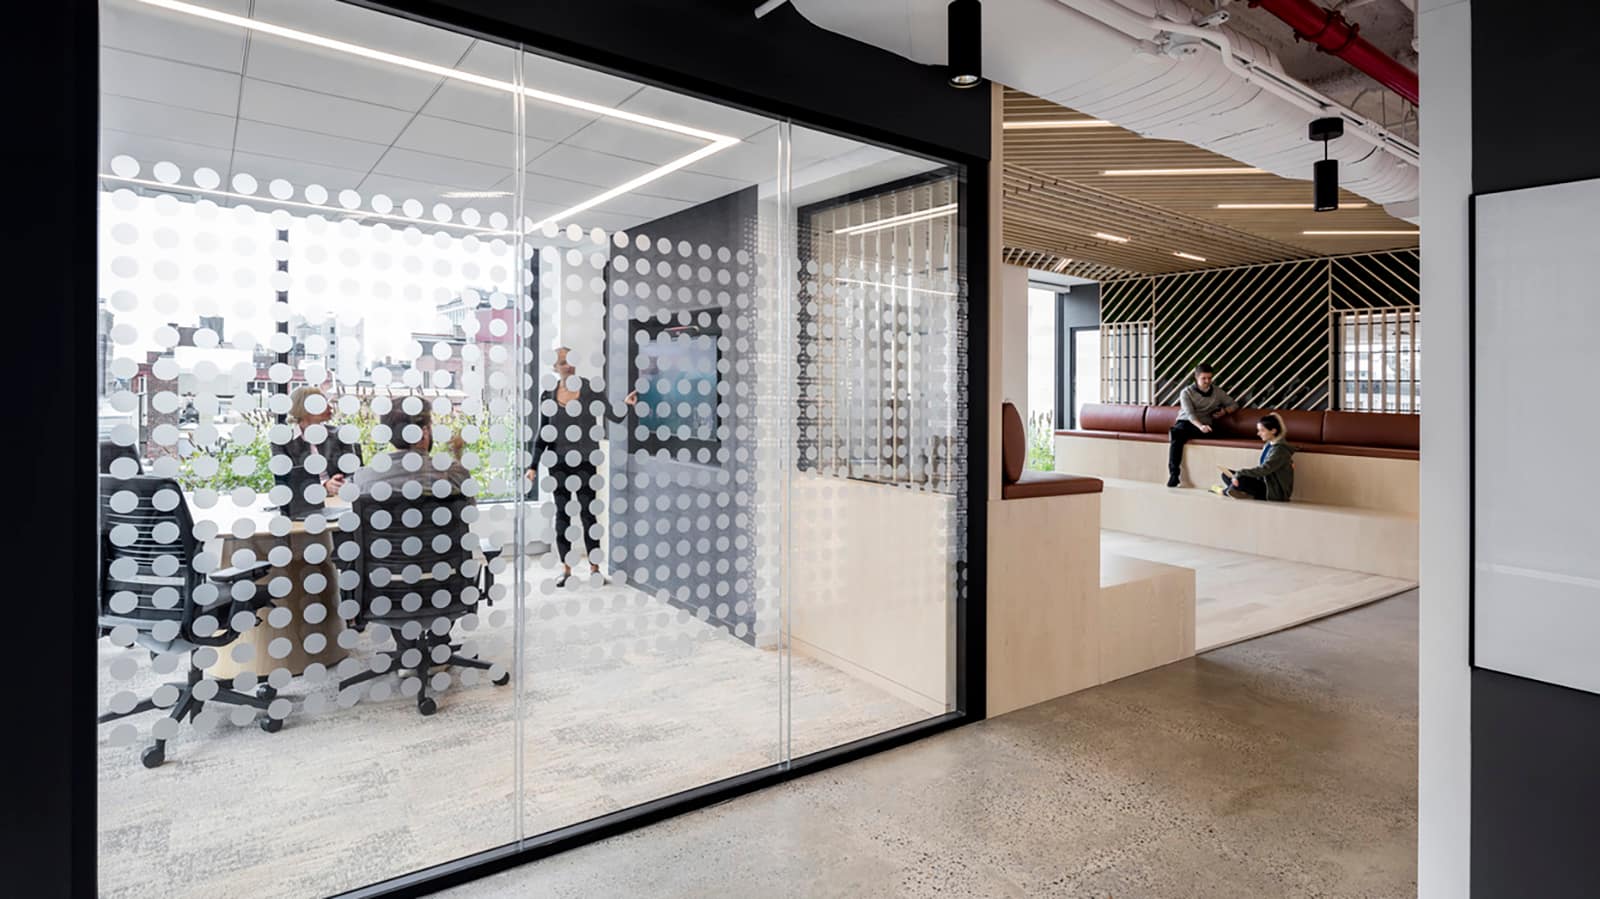 MasterCard meeting room in New York City by IA designers and architects